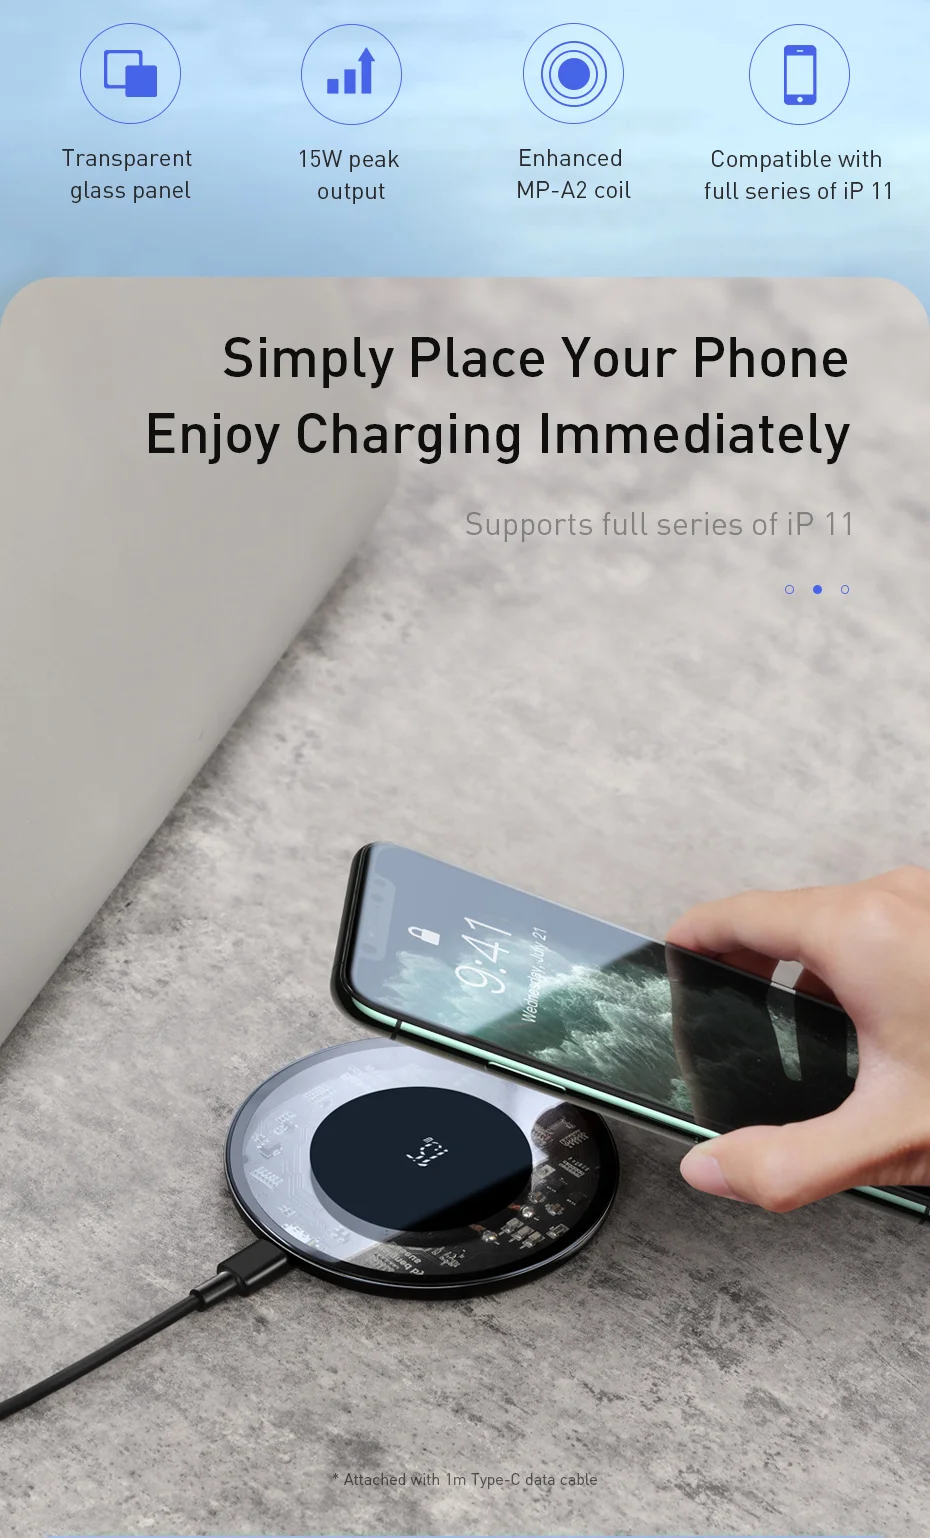 Baseus 15W Qi Wireless Charger for iPhone 11 Pro Xs Max X 8 Induction Fast Wireless Charging Pad for Samsung S20 Huawei Xiaomi 9